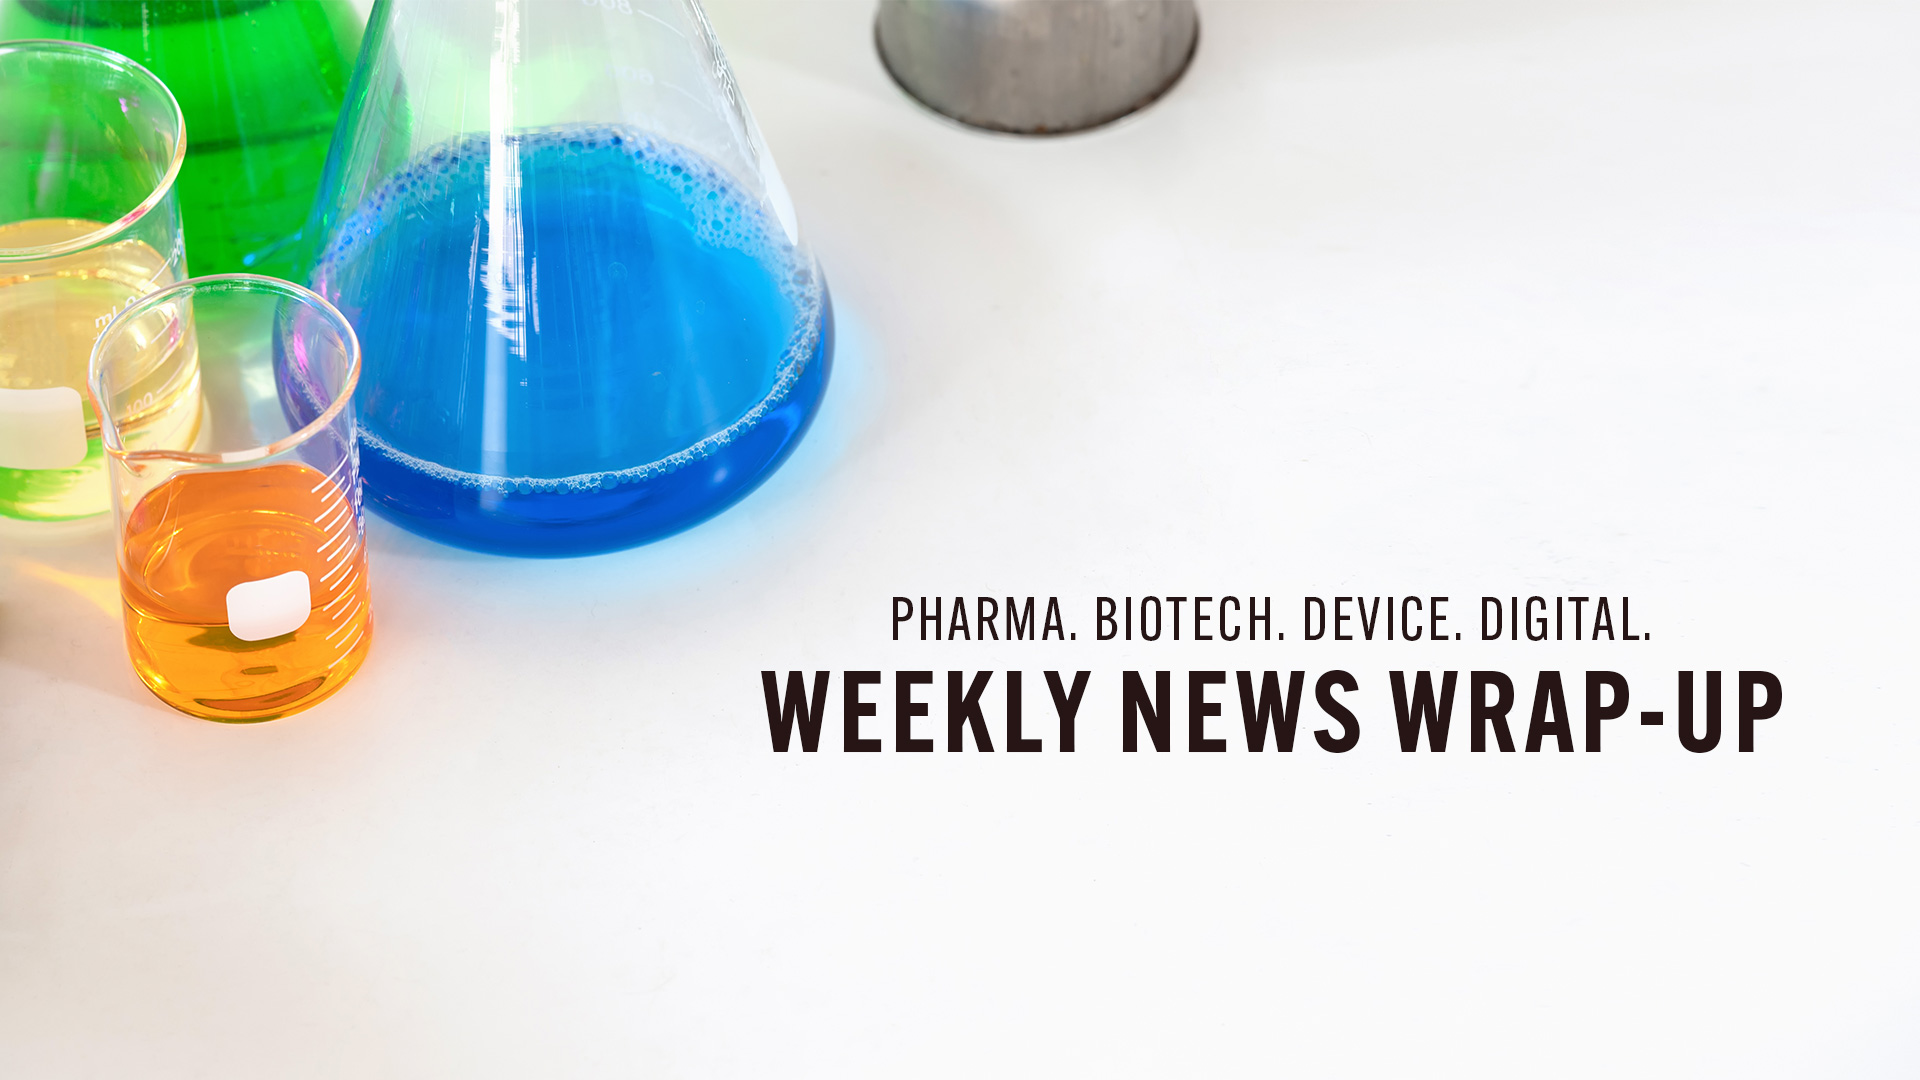 Healthcare Industry News Weekly Wrap-Up: December 23, 2022